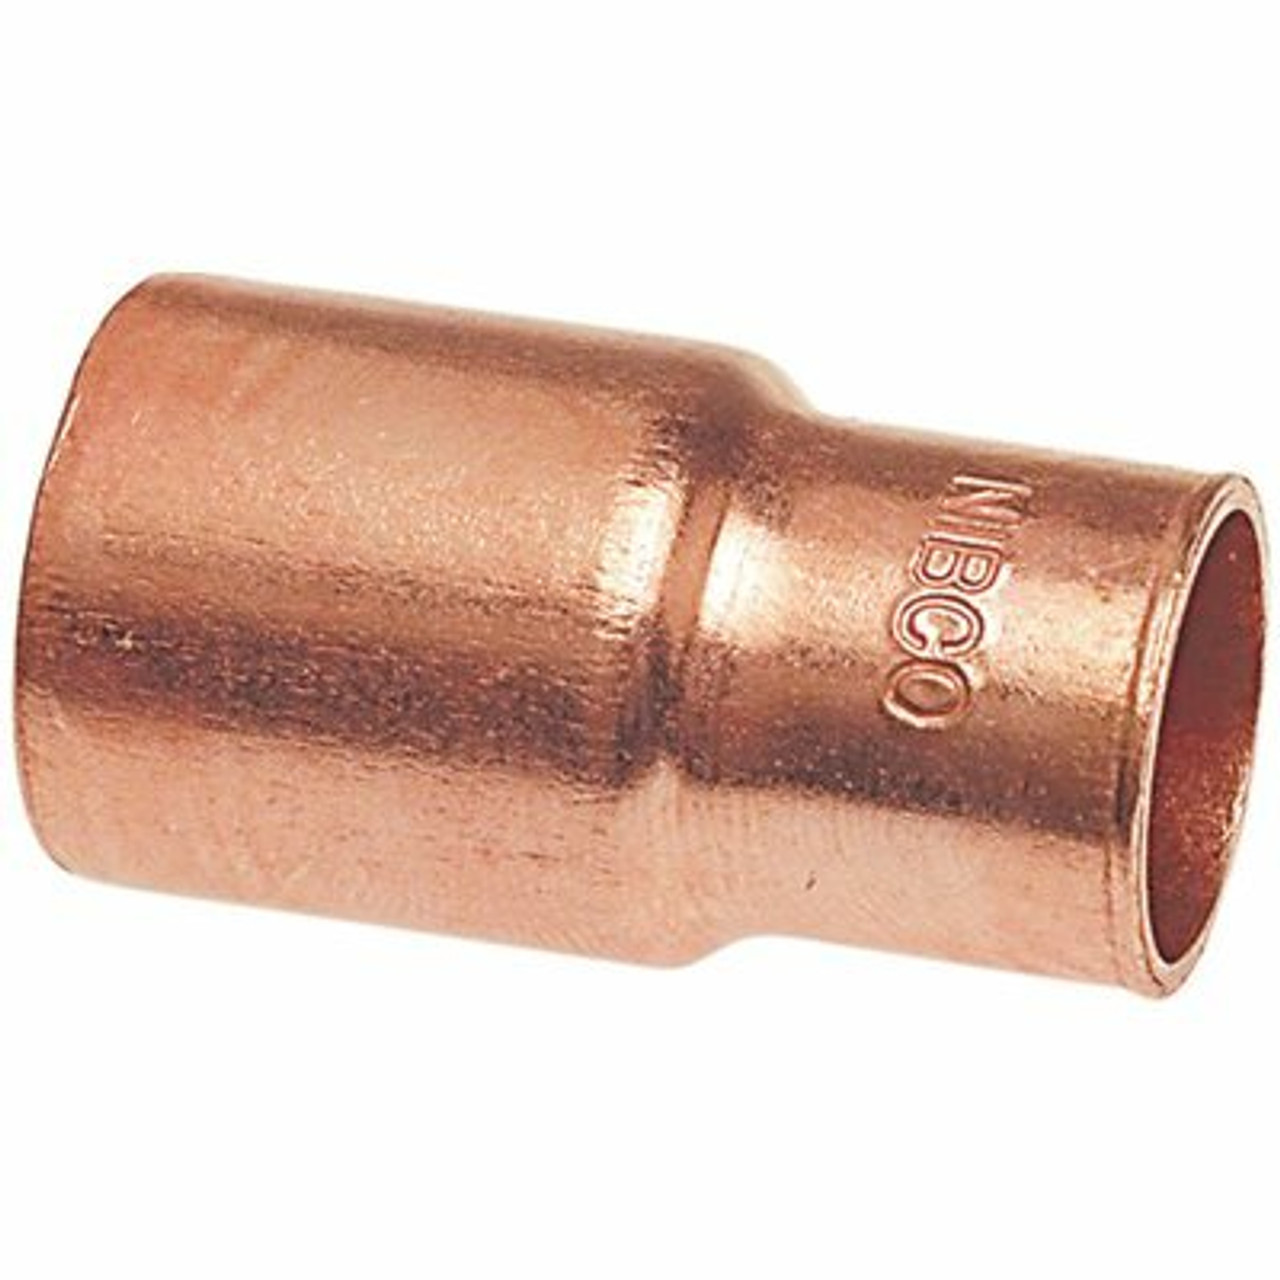 Nibco 1 In. X 3/4 In. Wrot Copper Ftg X C Fitting Reducing Coupling ( 25-Pack)